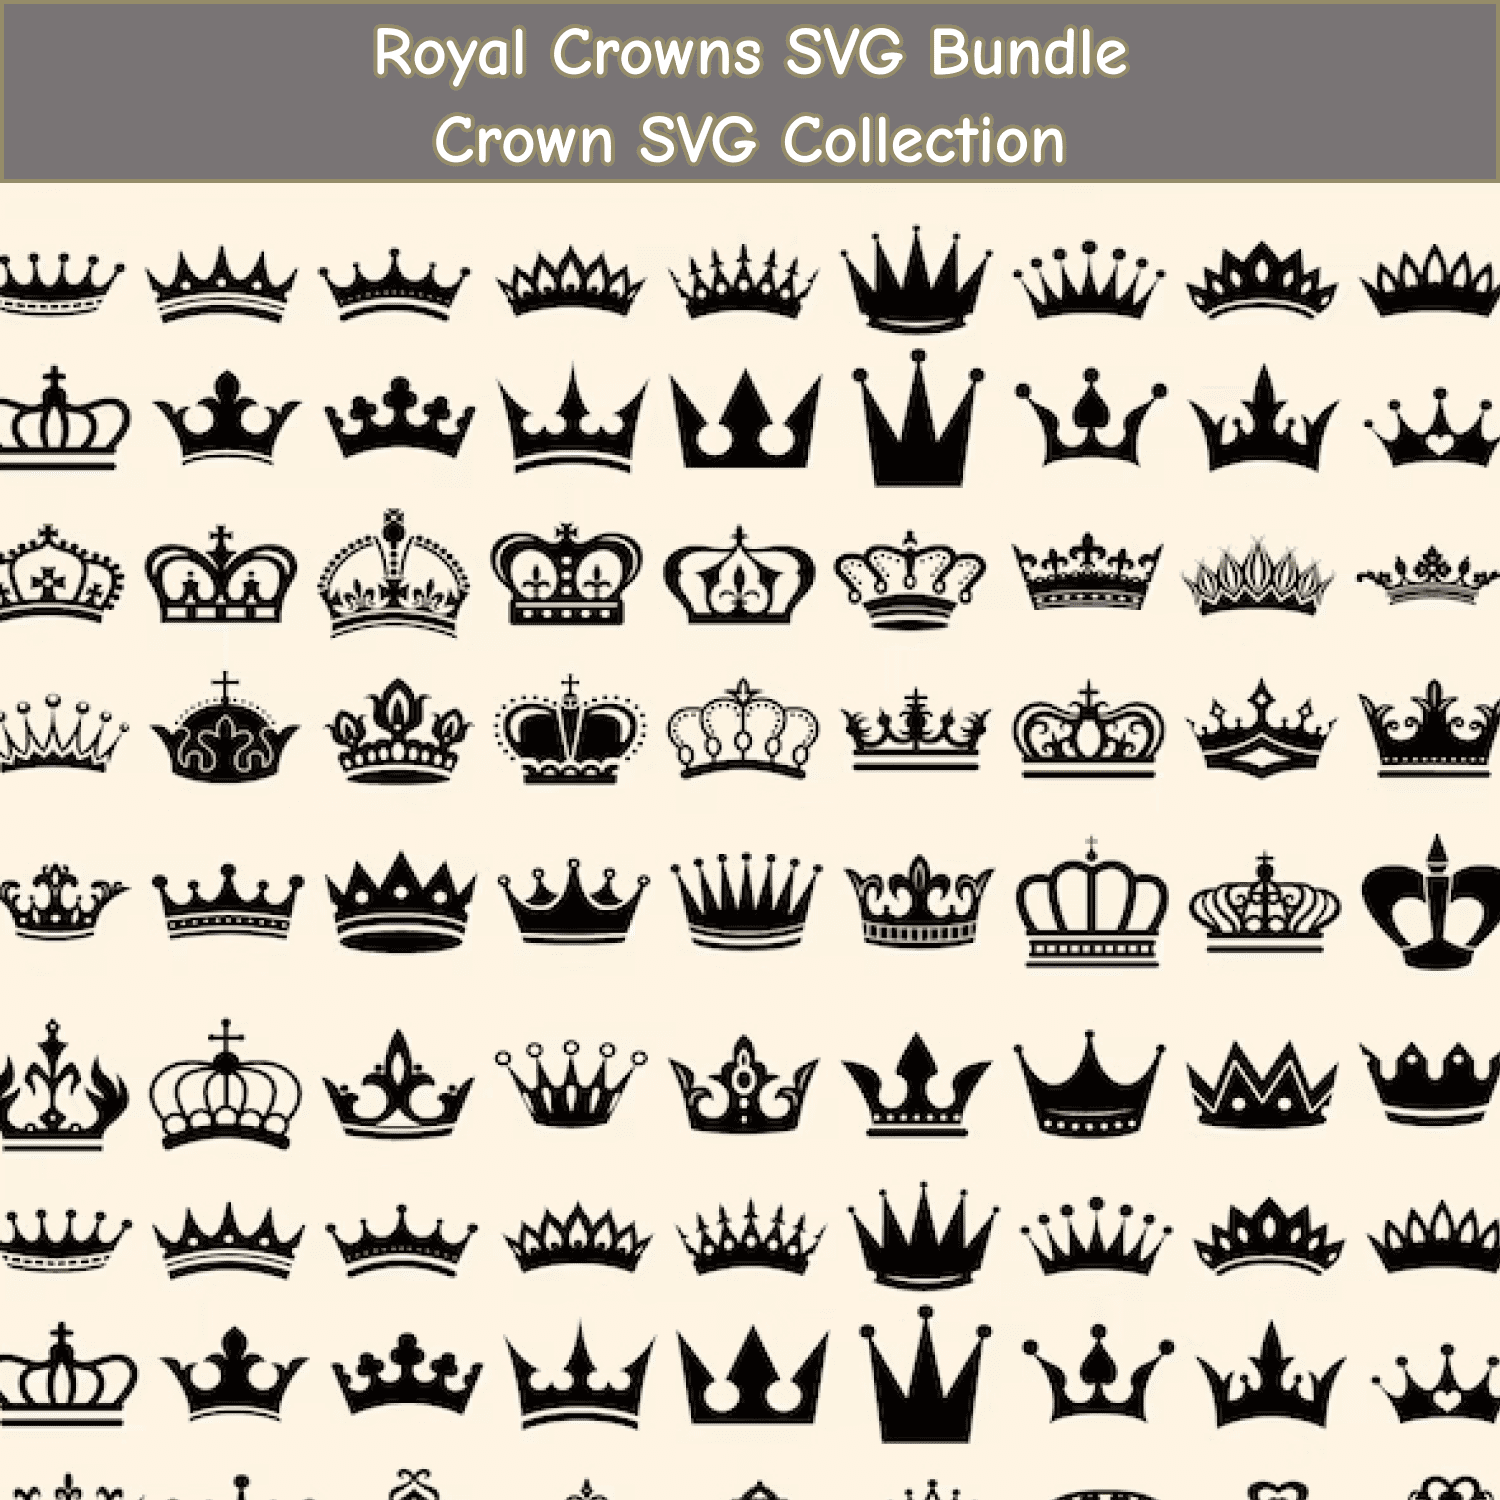 Crown SVG Collection image.